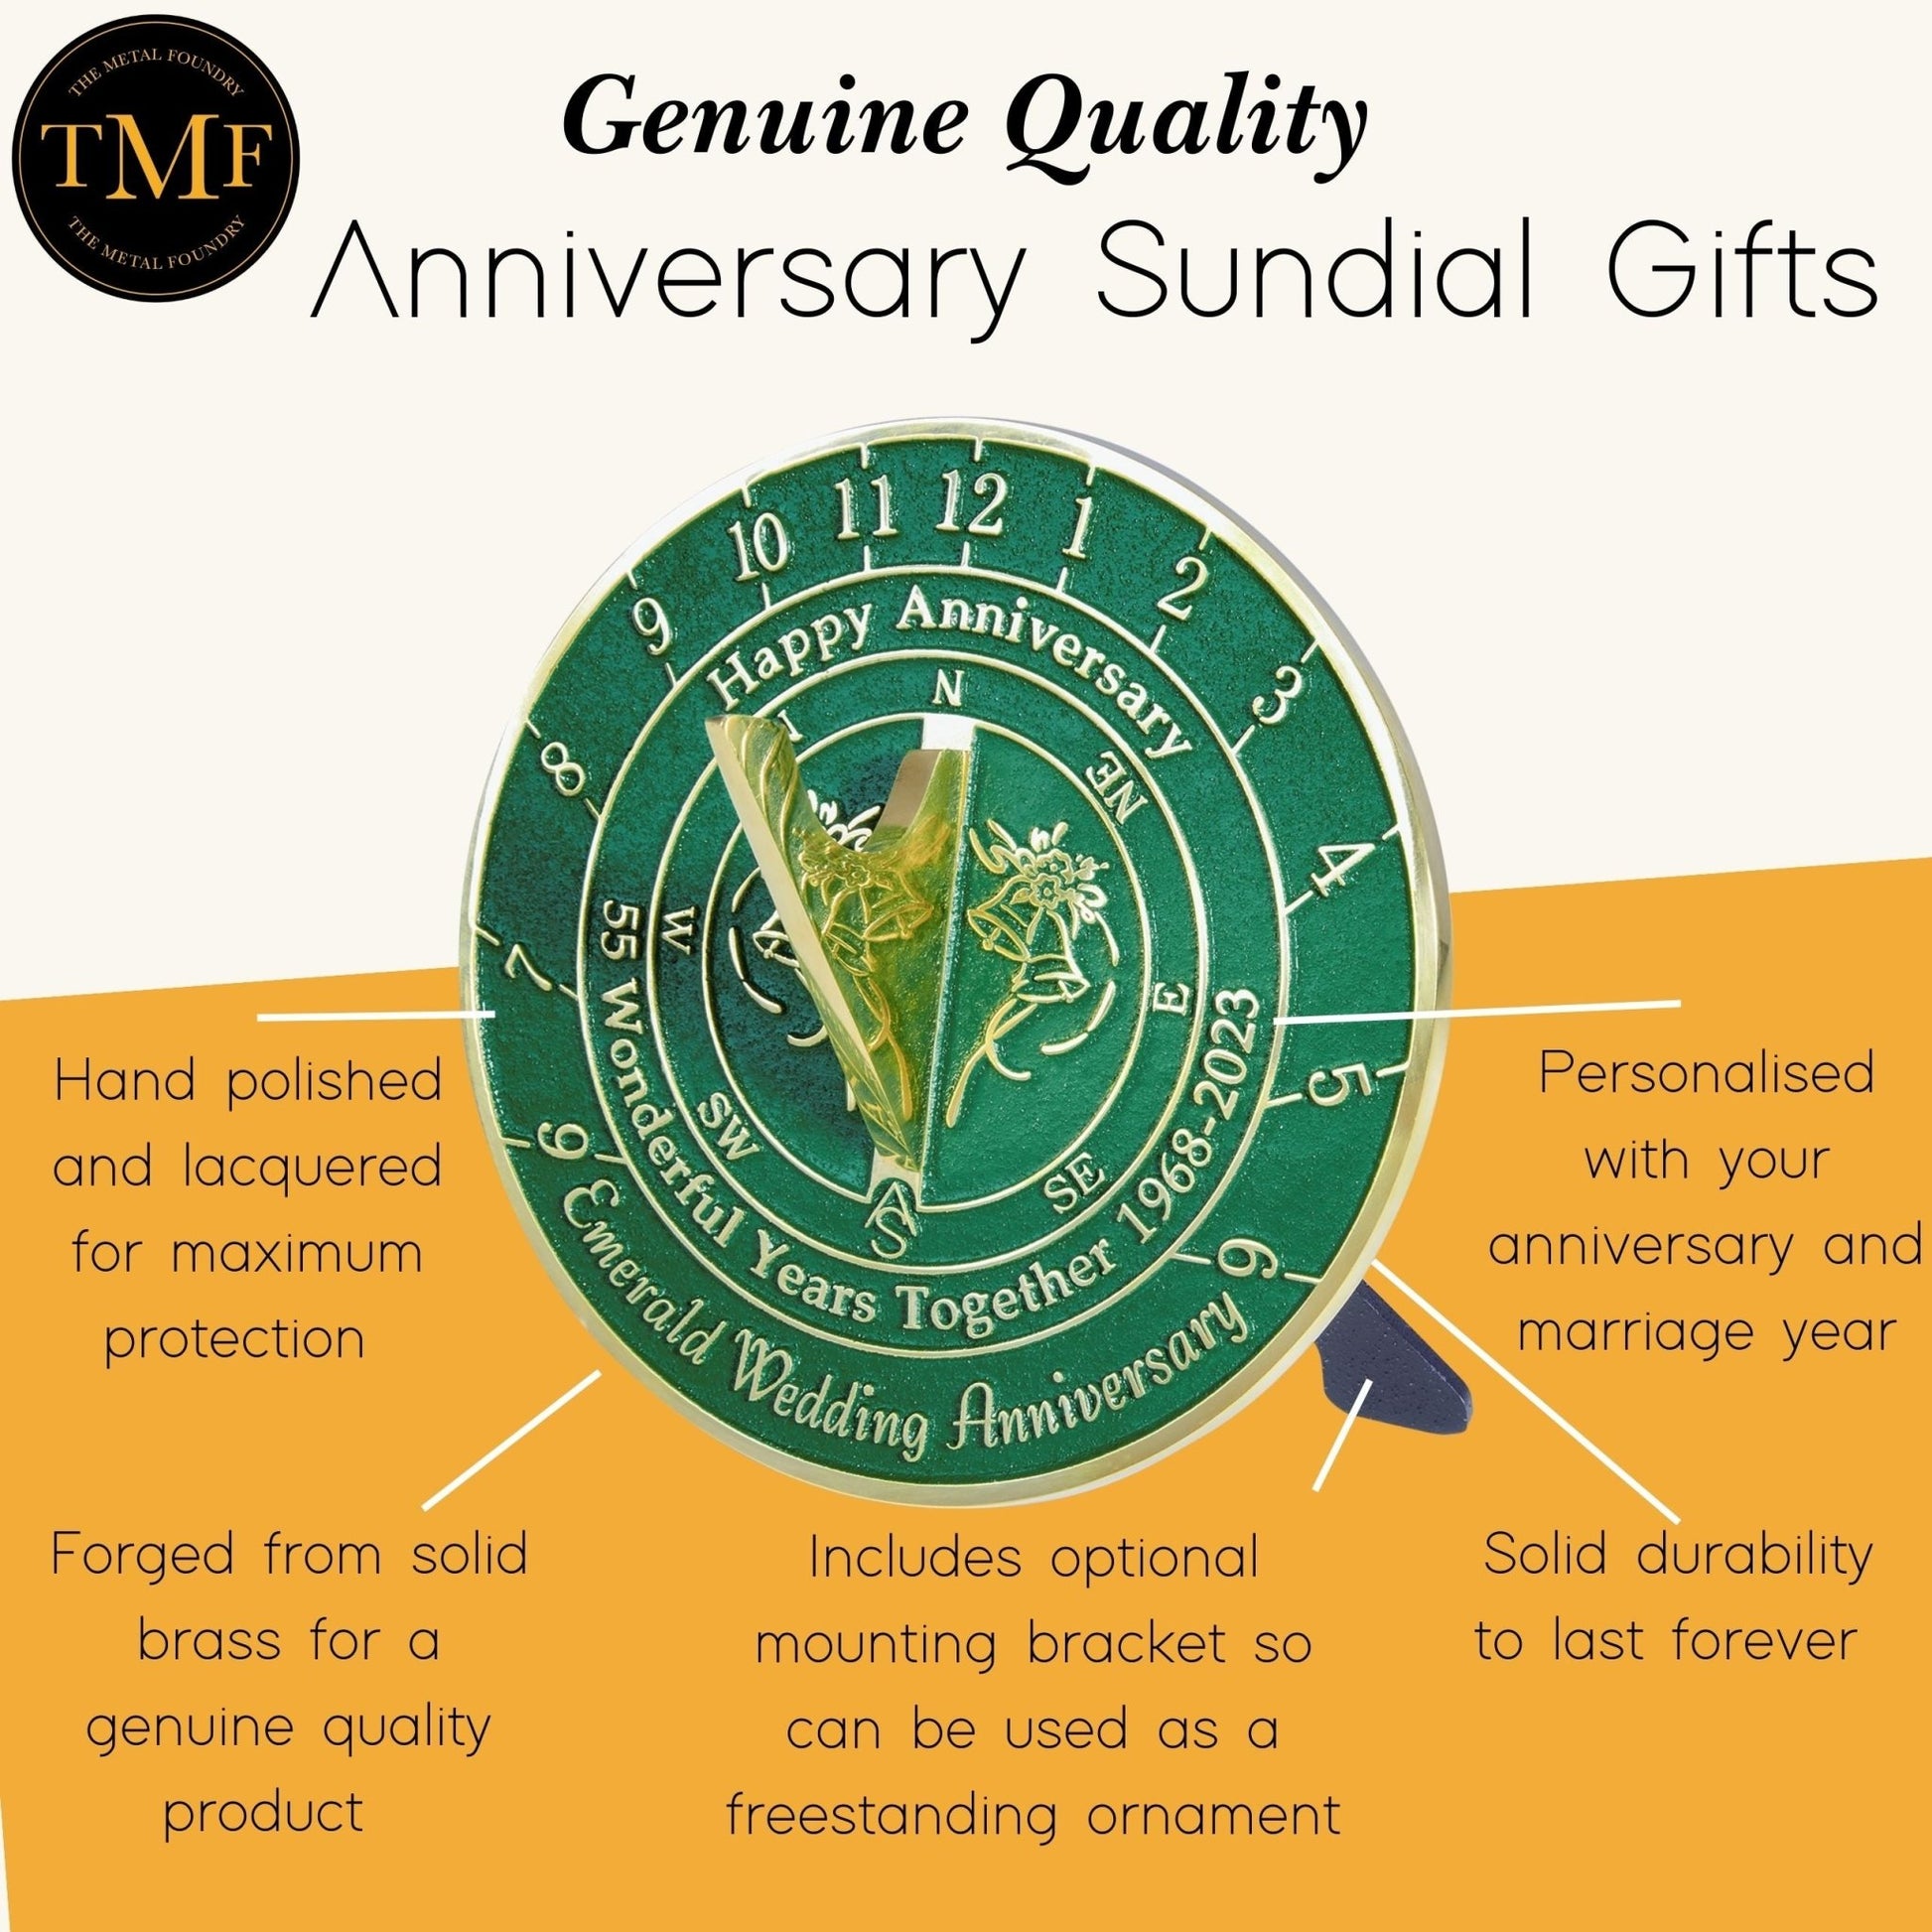 Emerald 55th Anniversary Sundial® 2023 Edition - The Metal Foundry